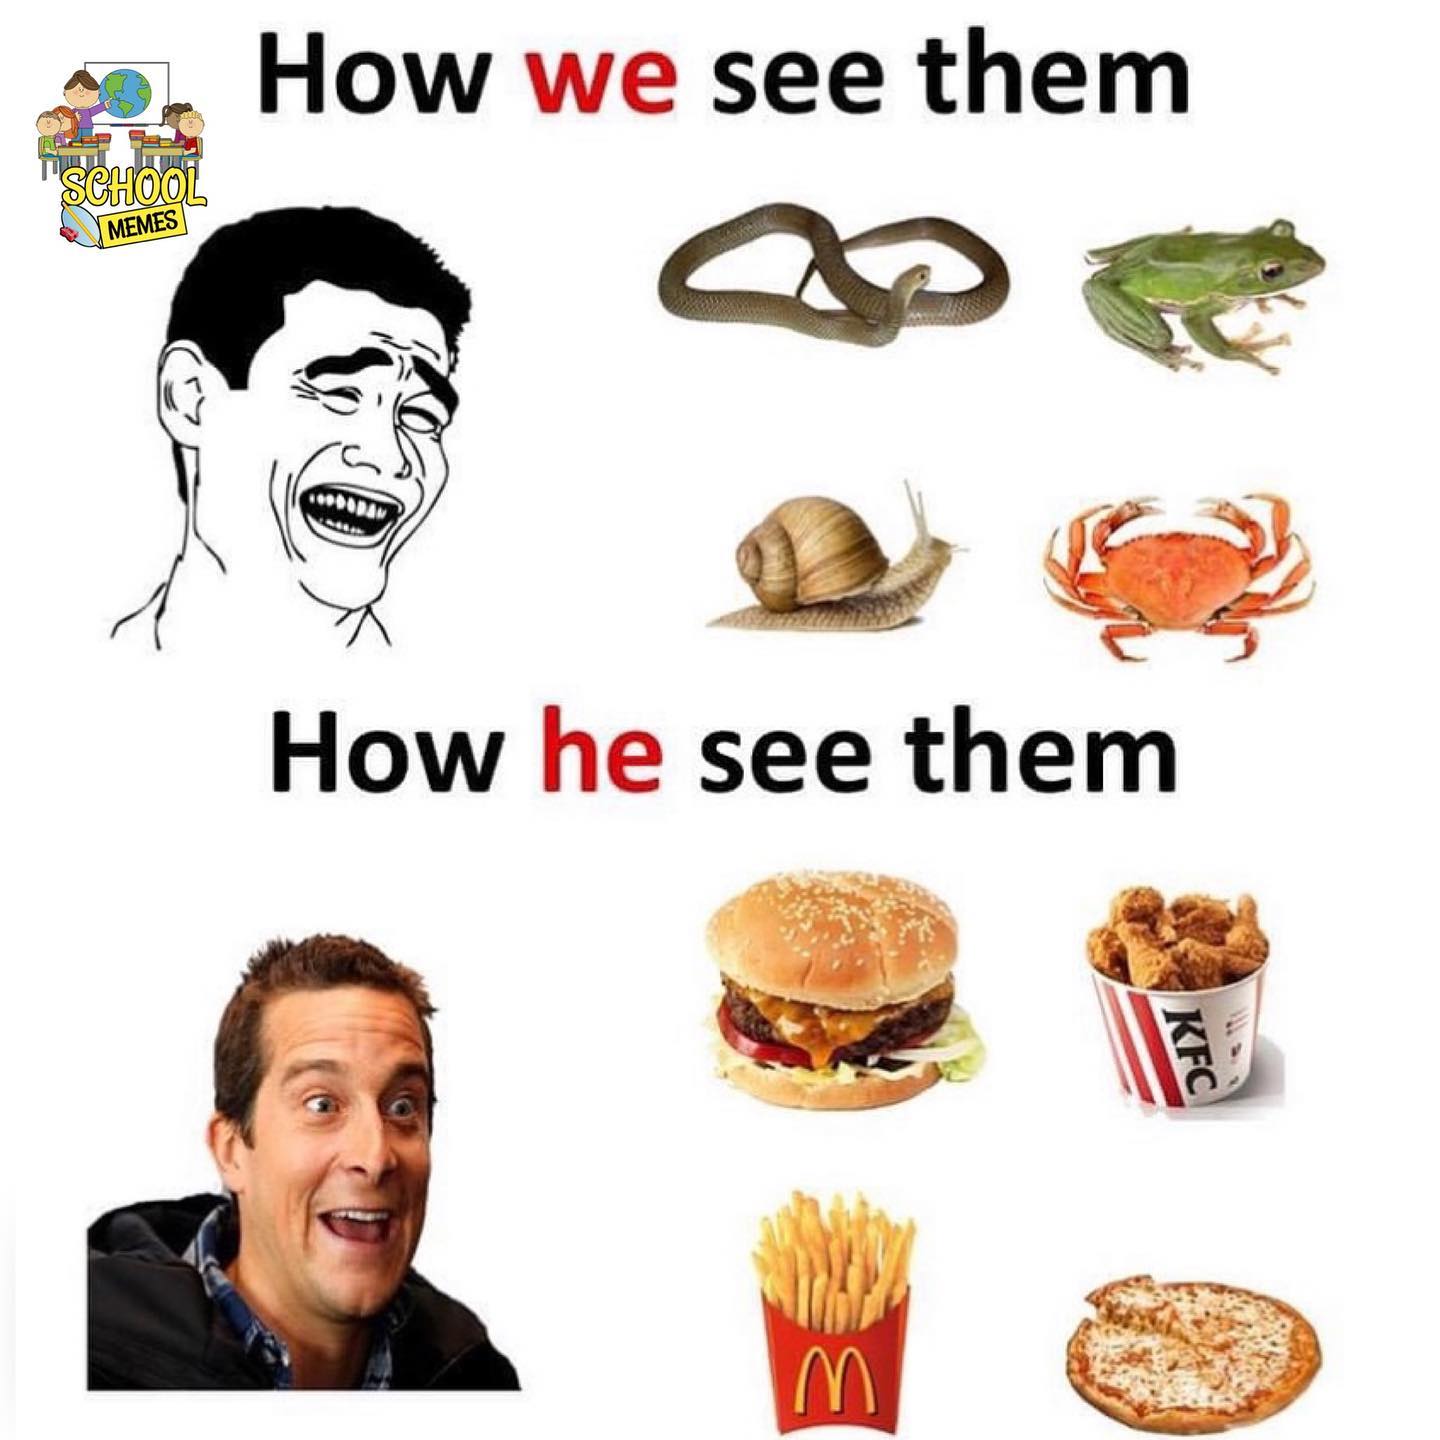 bear grylls eating crabs - How we see them School Memes How he see them Kfc E